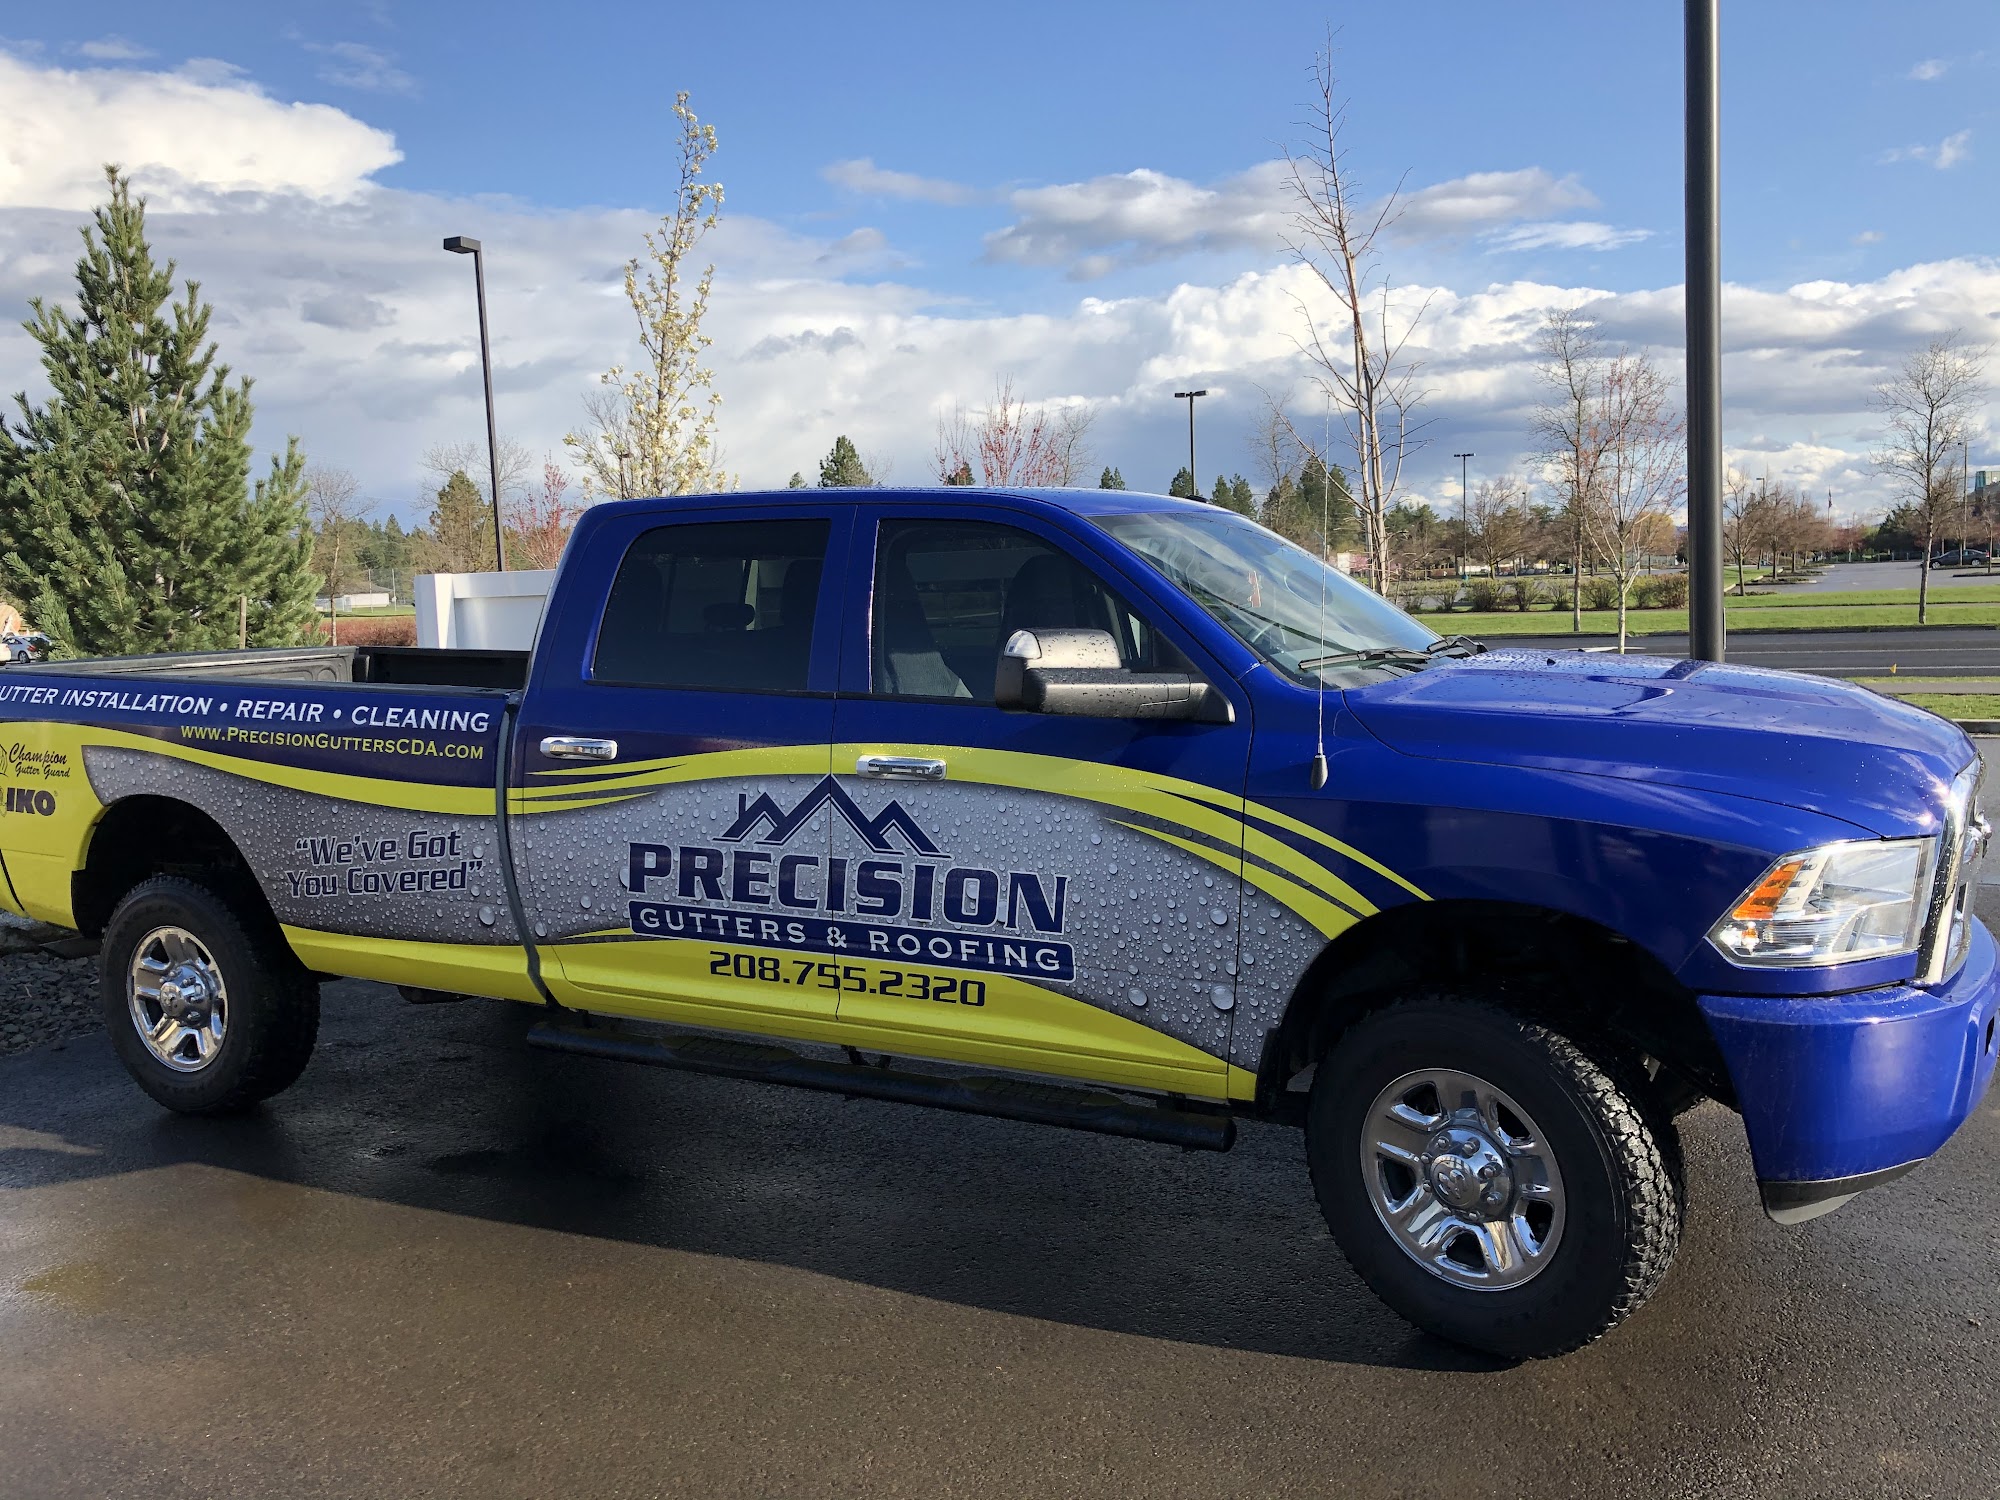 Precision Gutters & Roofing